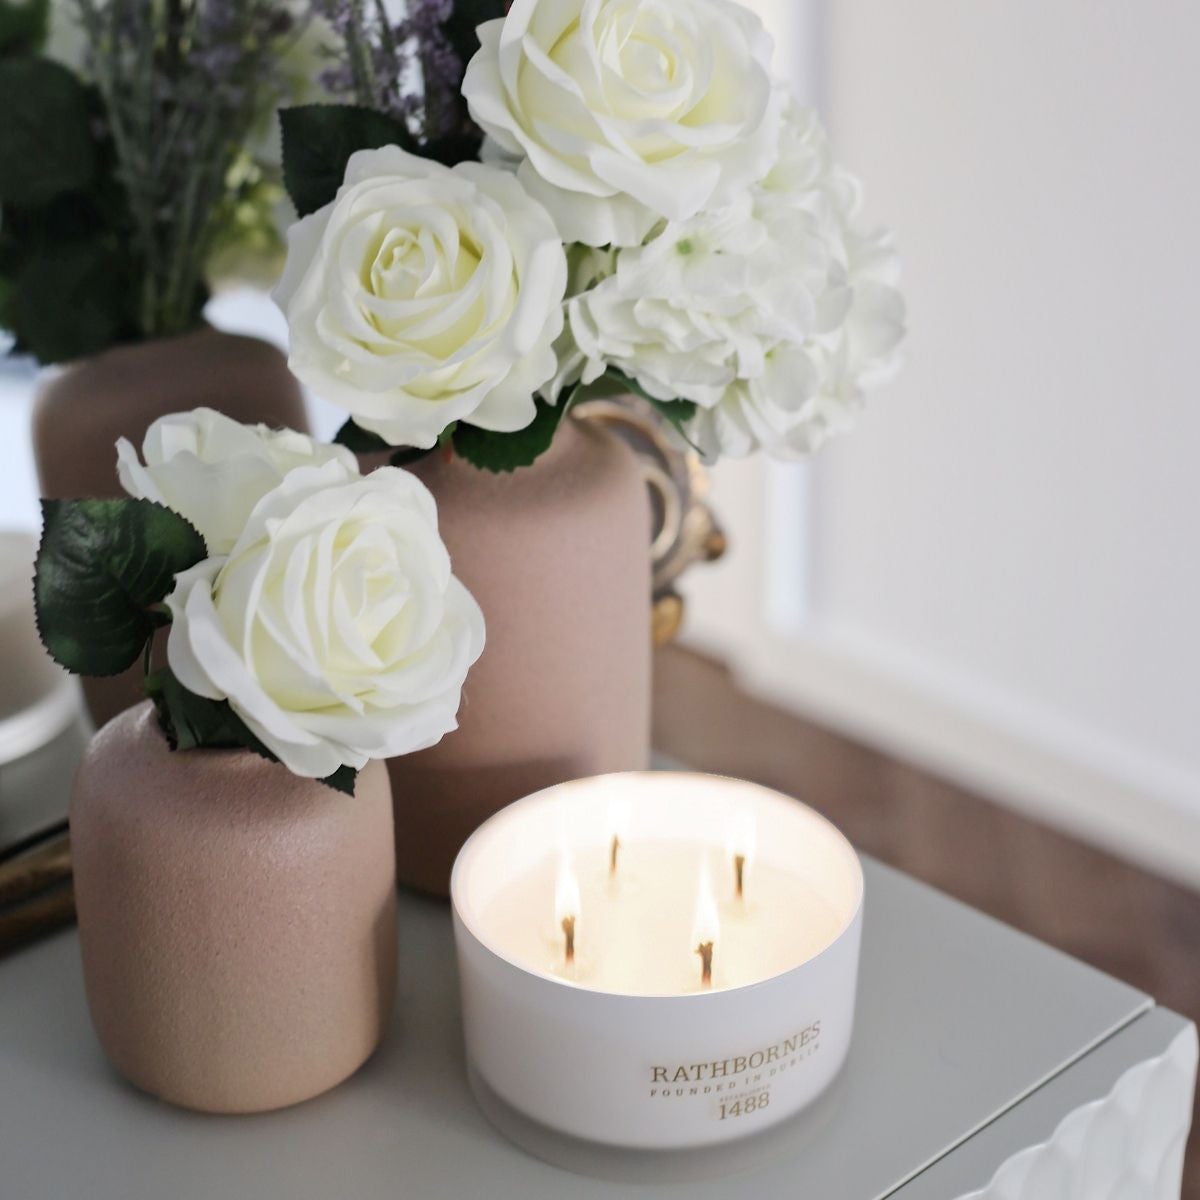 Rathbornes | Dublin Dawn Irish Rock Rose, Davana And Raspberries Scented Candle Mrs Tea's Boutique and Bakery